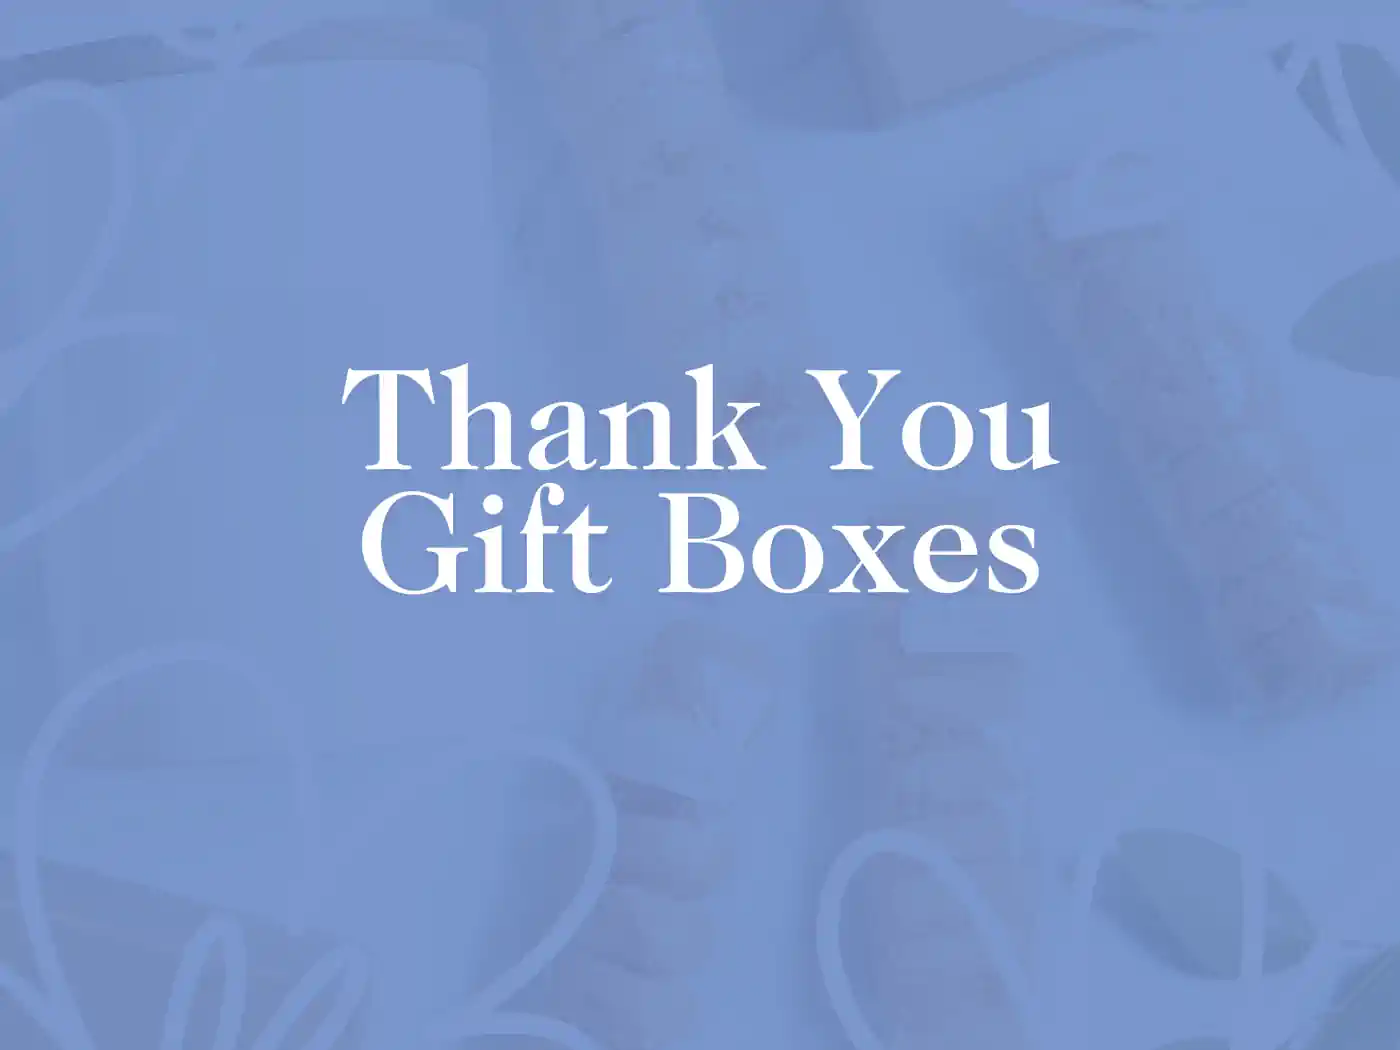 Promotional image featuring the text "Thank You Gift Boxes" over a soft blue background with subtle imagery of gift box ribbons. Fabulous Flowers and Gifts - Thank You Gift Boxes. Delivered with Heart.